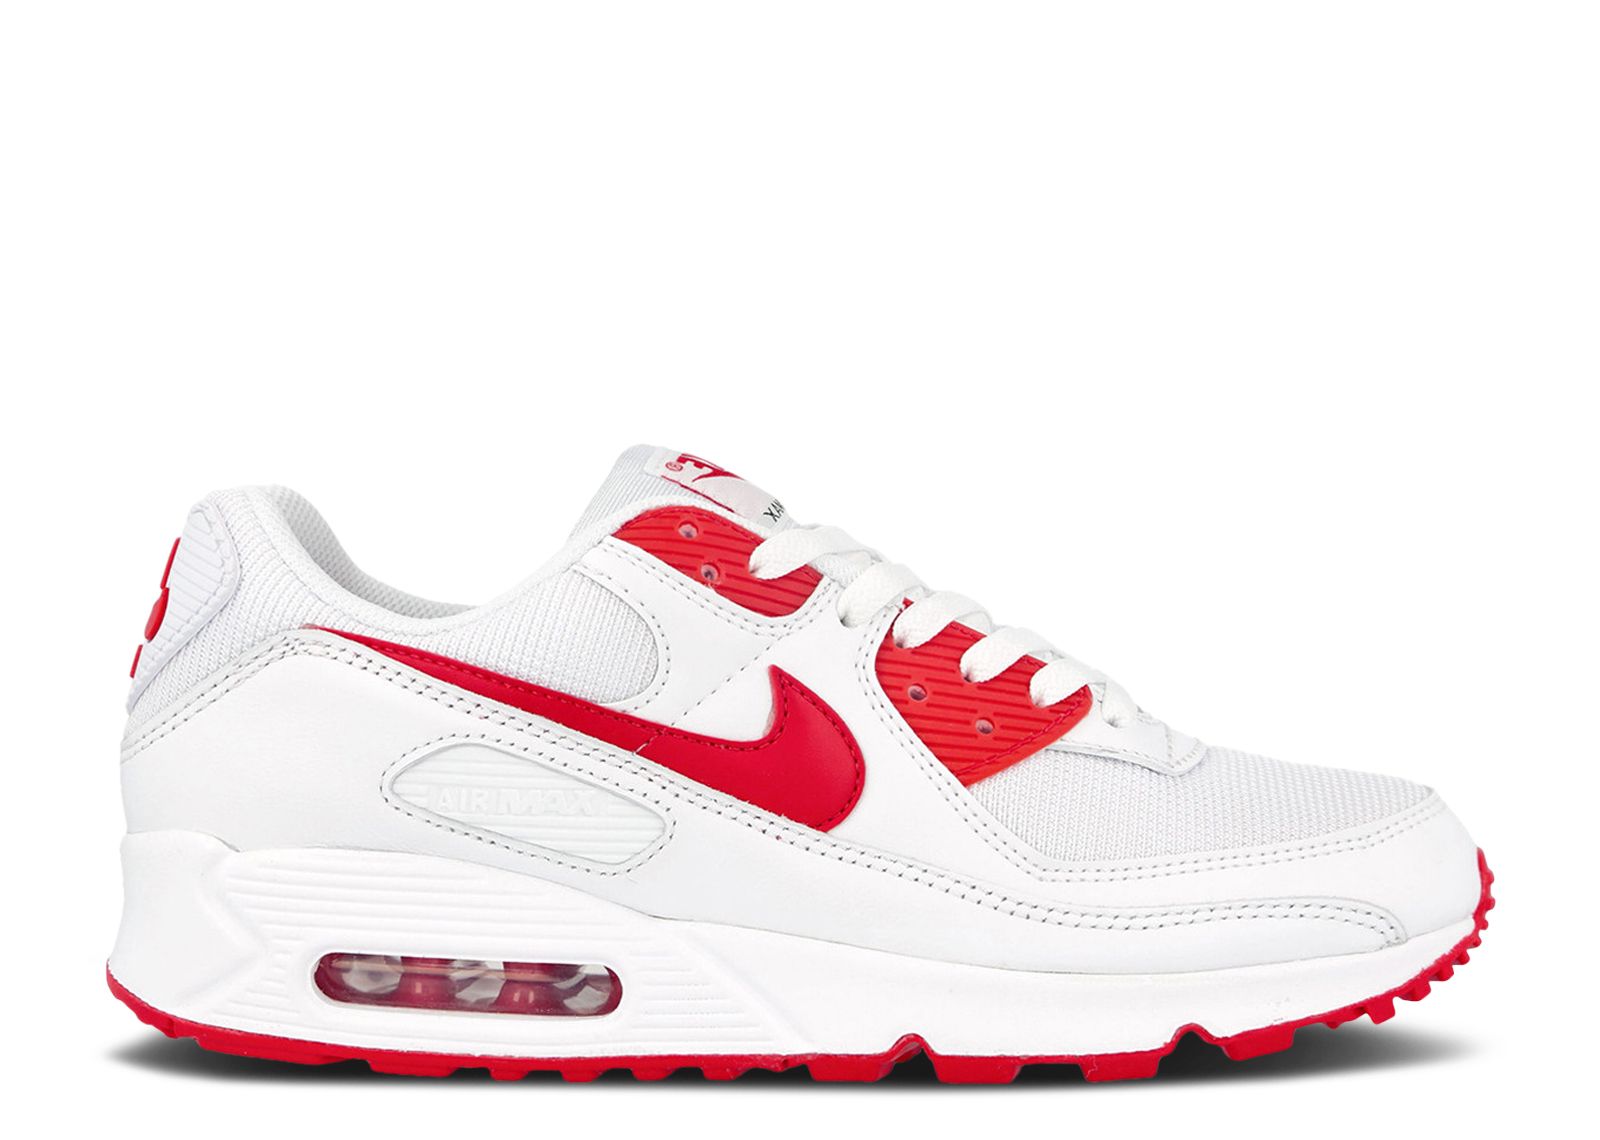 Air Max 90 'Color Pack - Nike - CT1028 101 white/university red | Flight Club